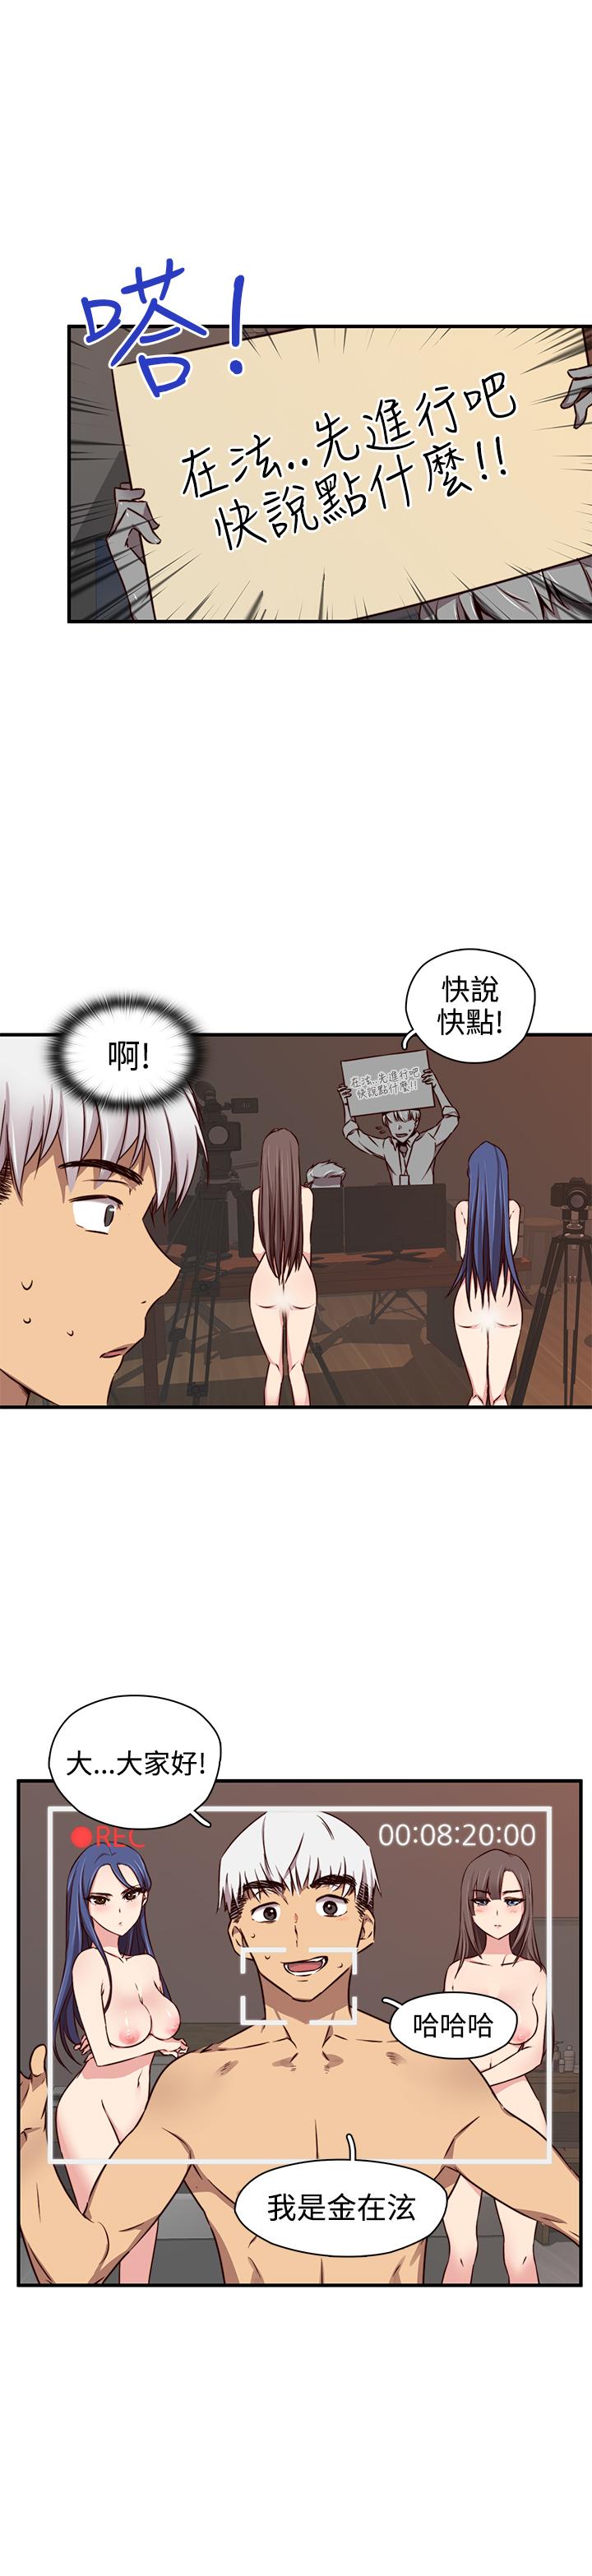 Hairy [Dasum & Puutaro] H-Campus H校园<第2季> ch.41-46 (chinese) Blond - Page 5